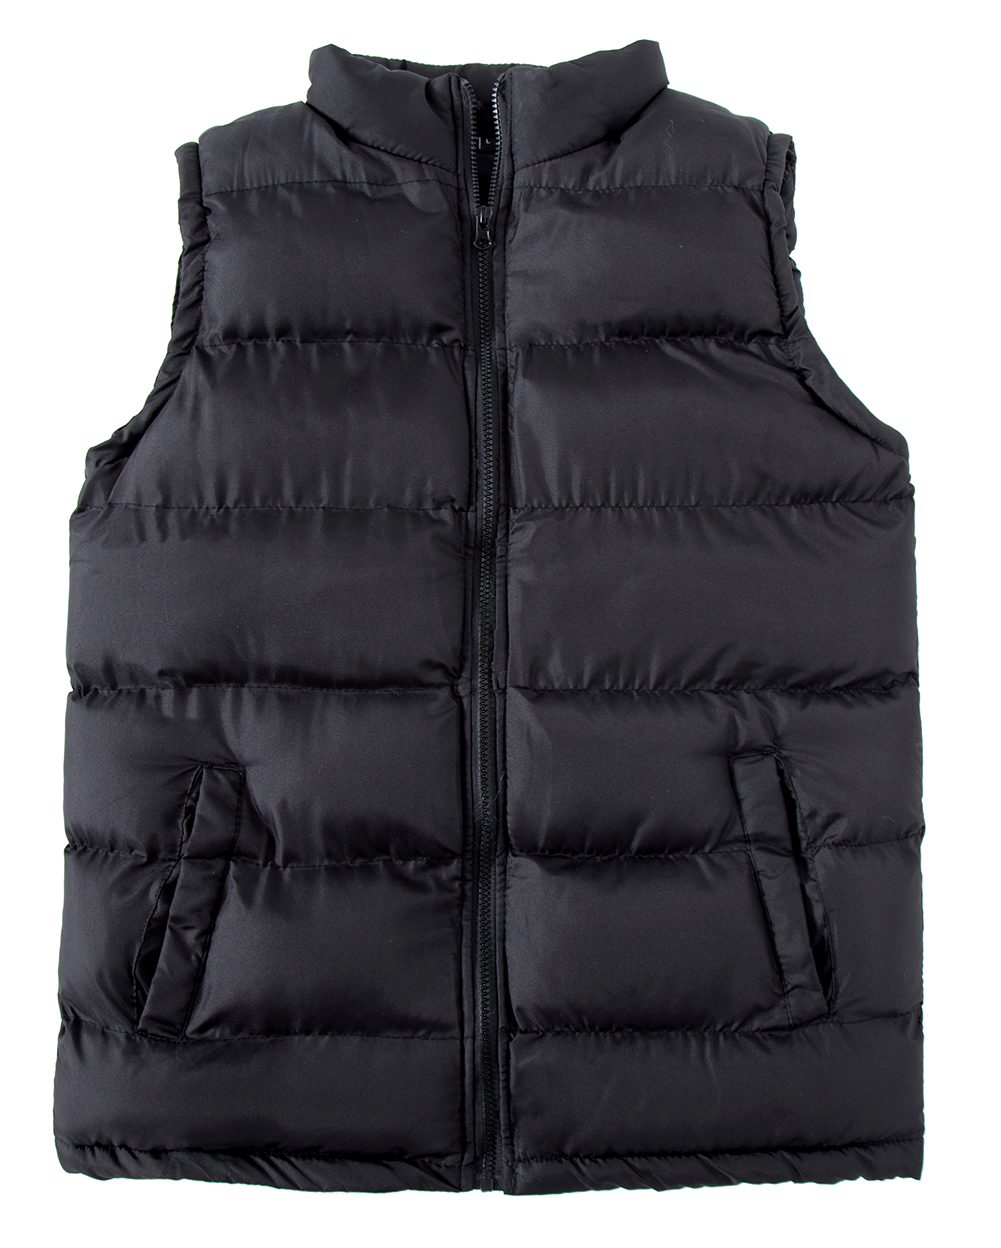 Man Casual Down Vest Stand Collar Puffer Coats Sleeveless Winter Jacket Quilted with Pockets